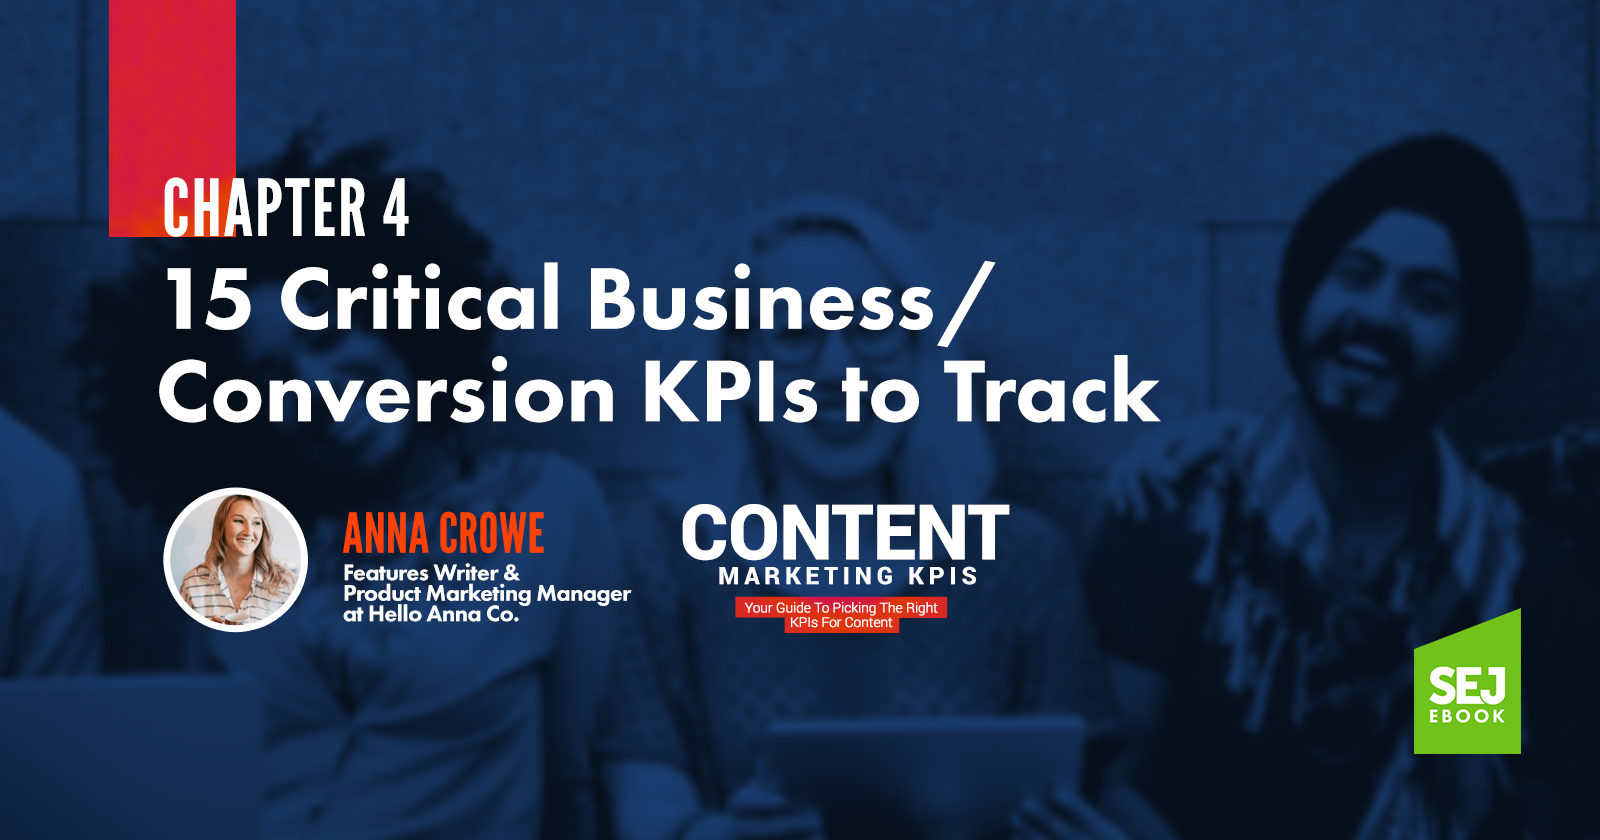 Chapter 4 - 15 Critical Business & Conversion KPIs to Track